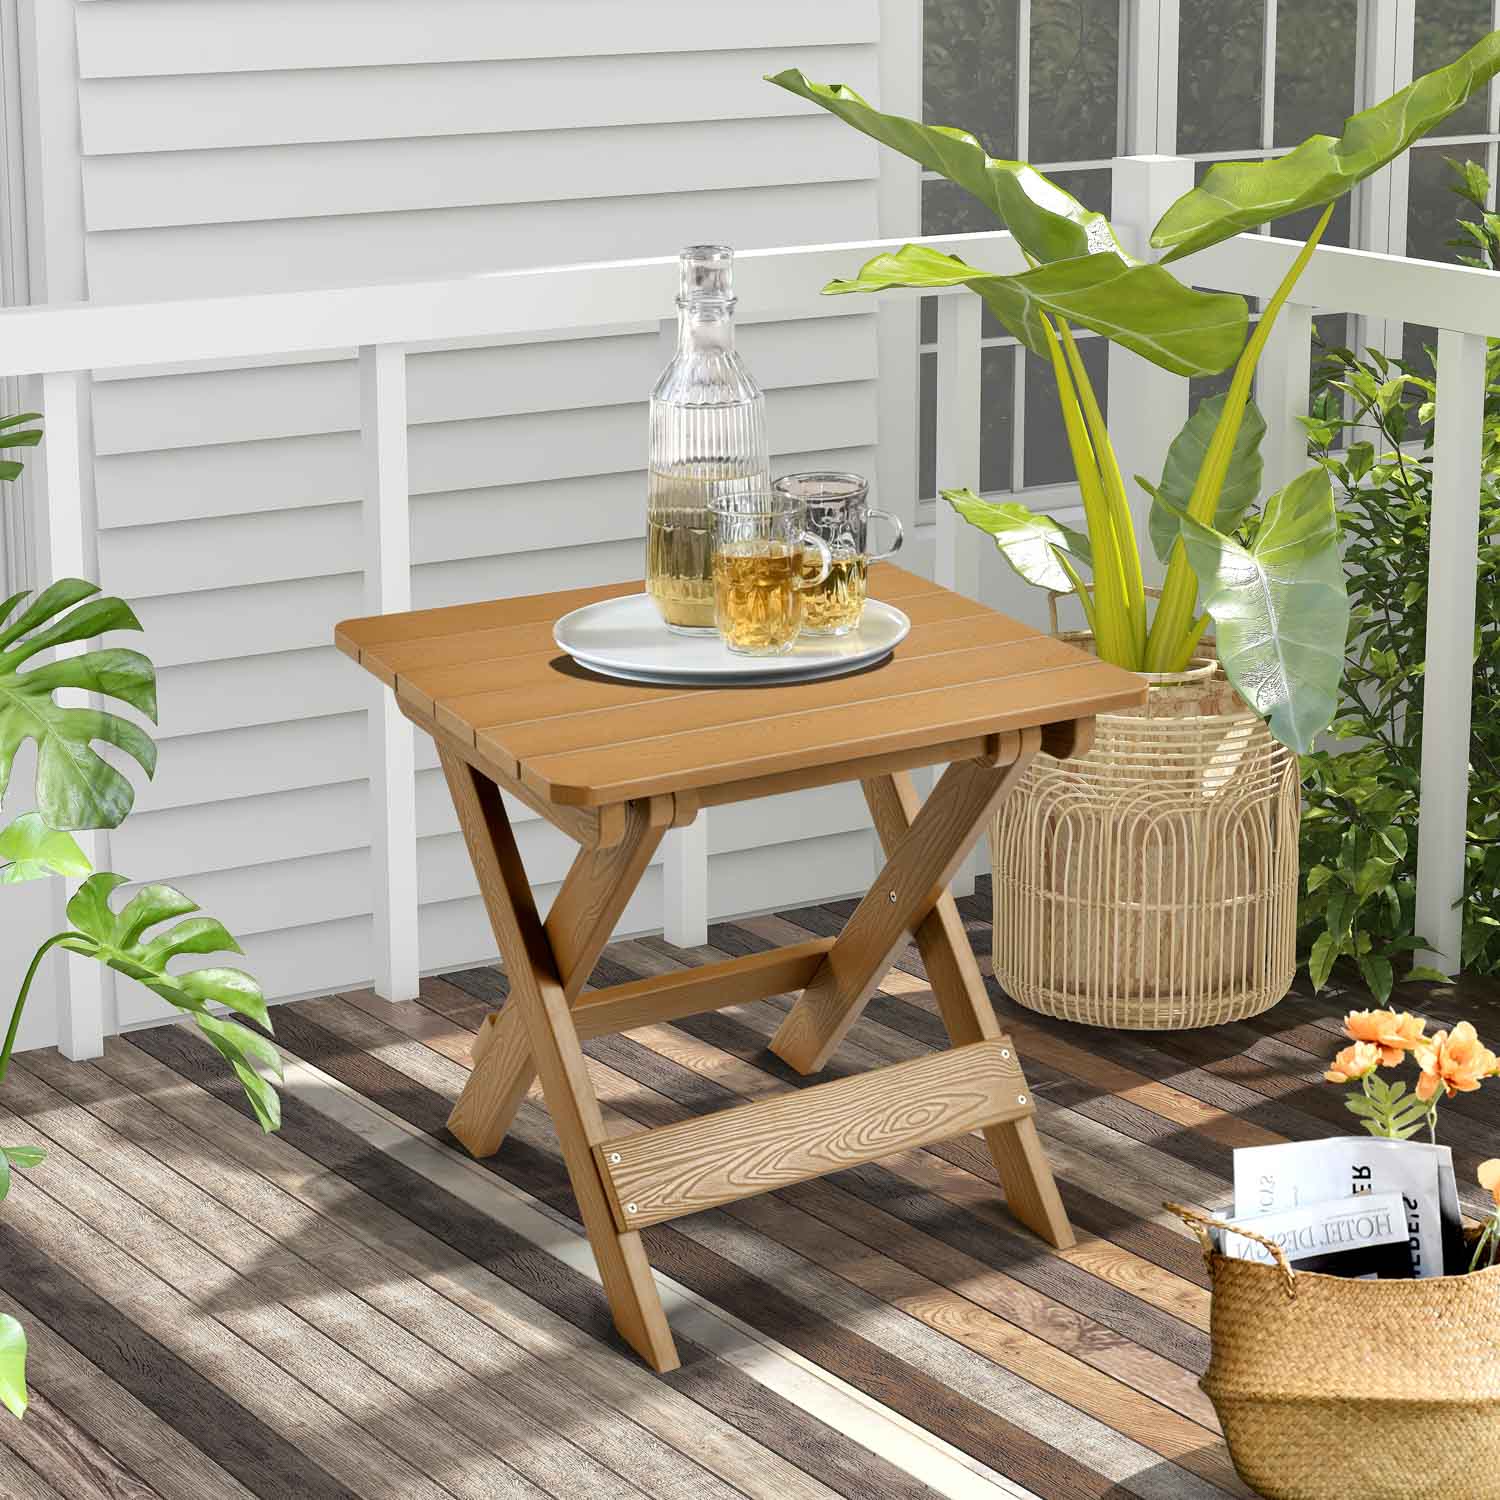 Ovios Bistro Set Table with Waterproof Plastic Frame